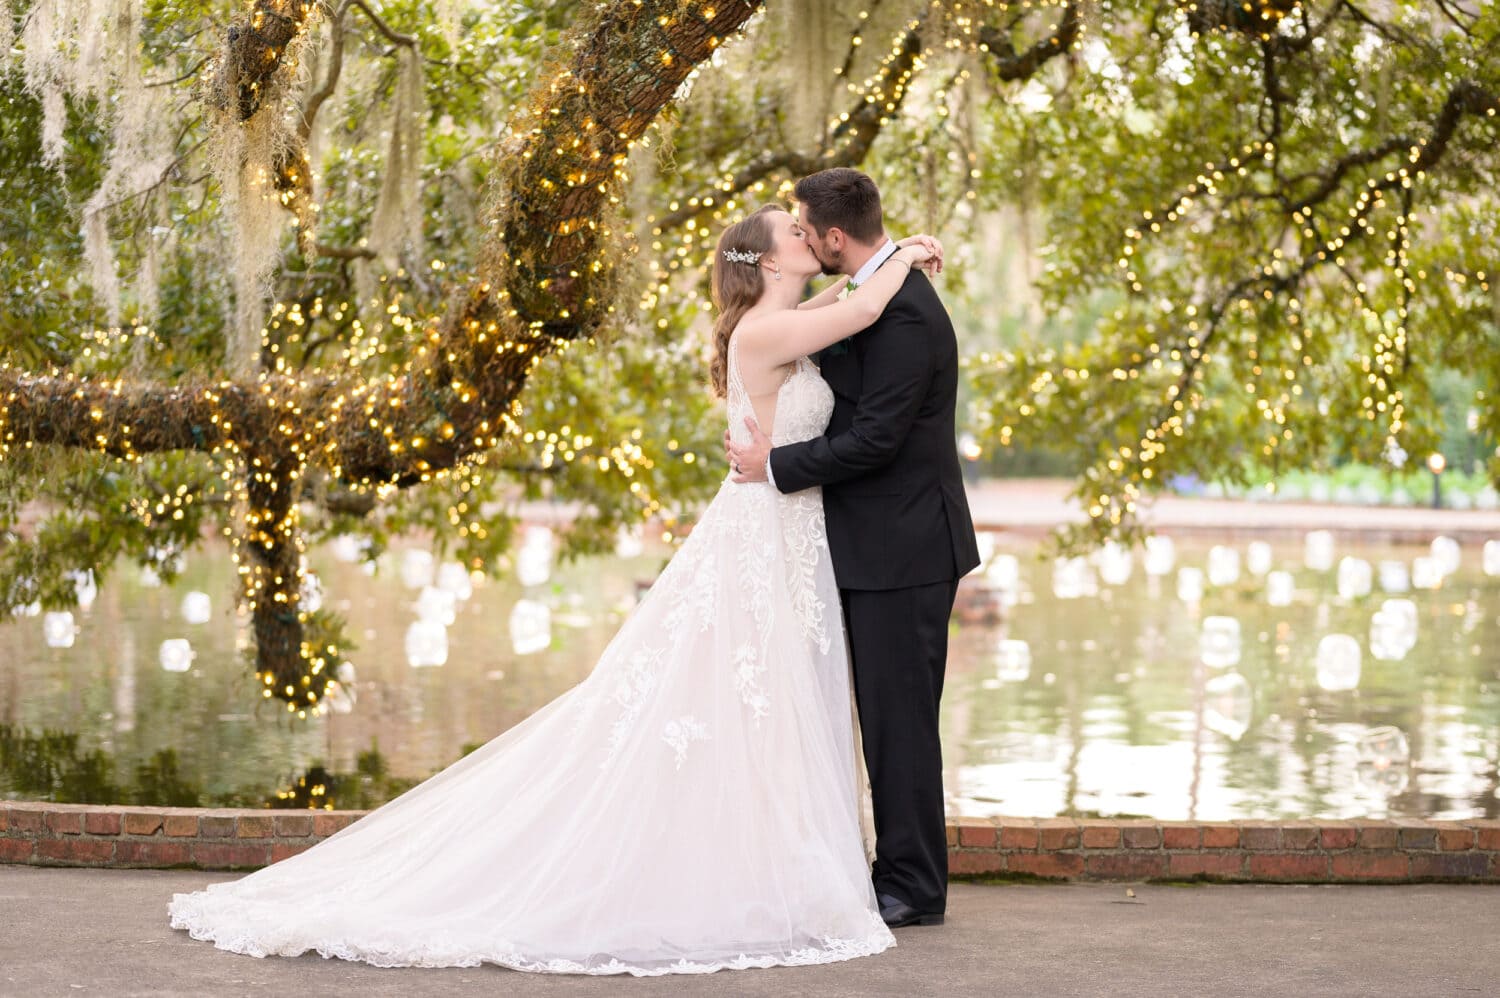 Kiss in front of the lights - Diana of the Chase Fountain - Brookgreen Gardens